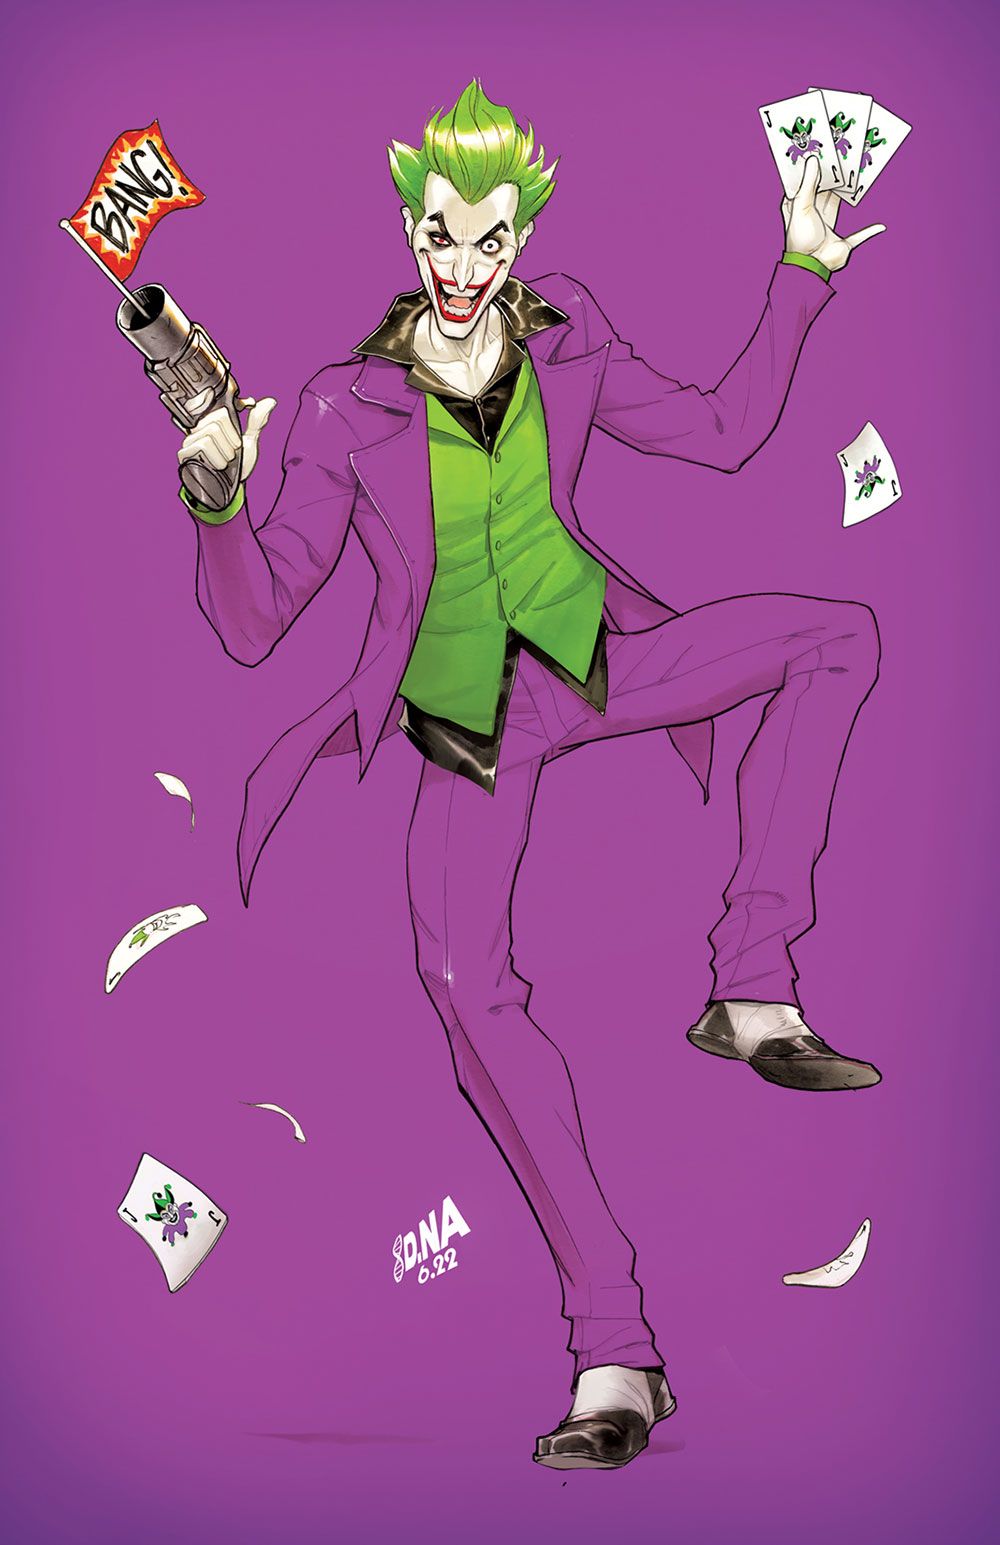 The-Joker-The-Man-Who-Stopped-Laughing-1-Open-to-Order-Variant-(Nakayama)